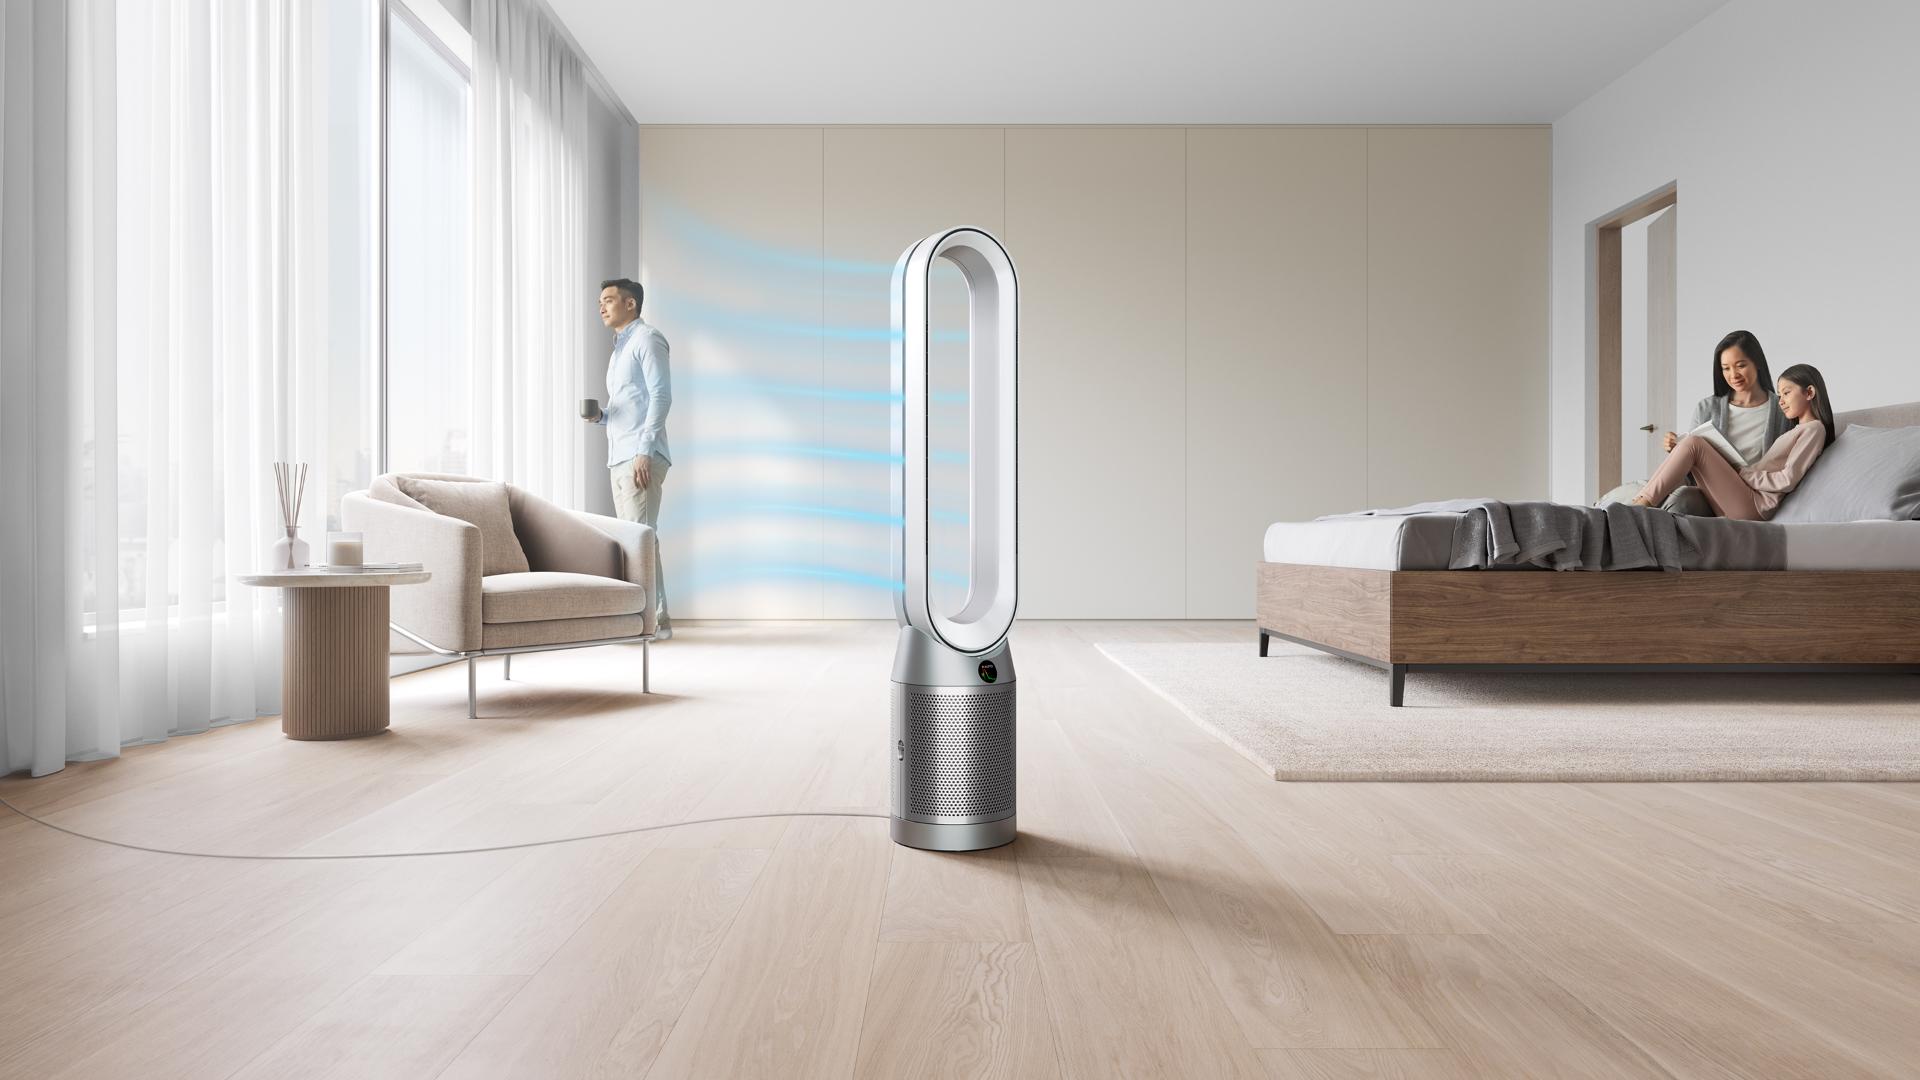 Dyson purifier projecting cooling purified airflow